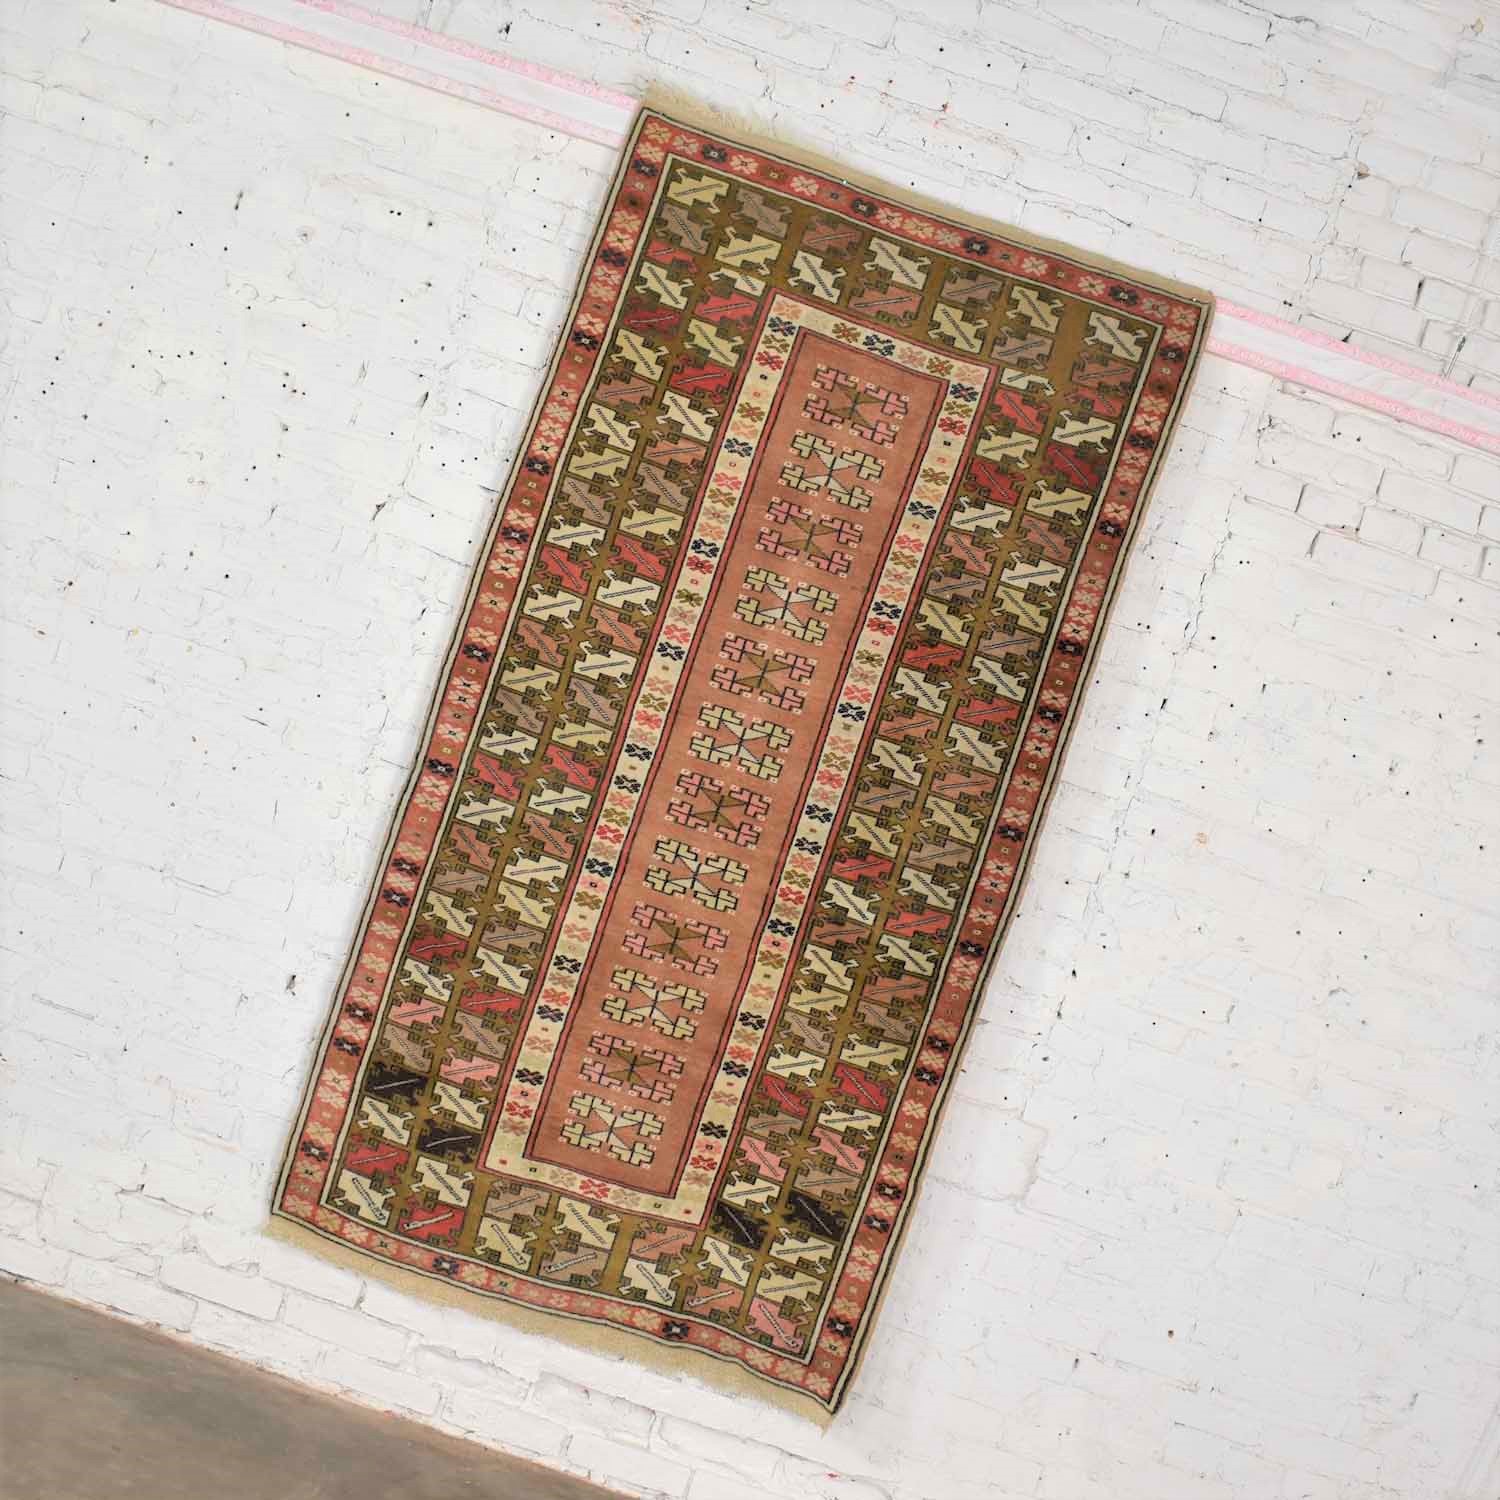 Vintage Wool Turkish Milas Style Woven Made Rug 6’ 7 x 3’ 6.5